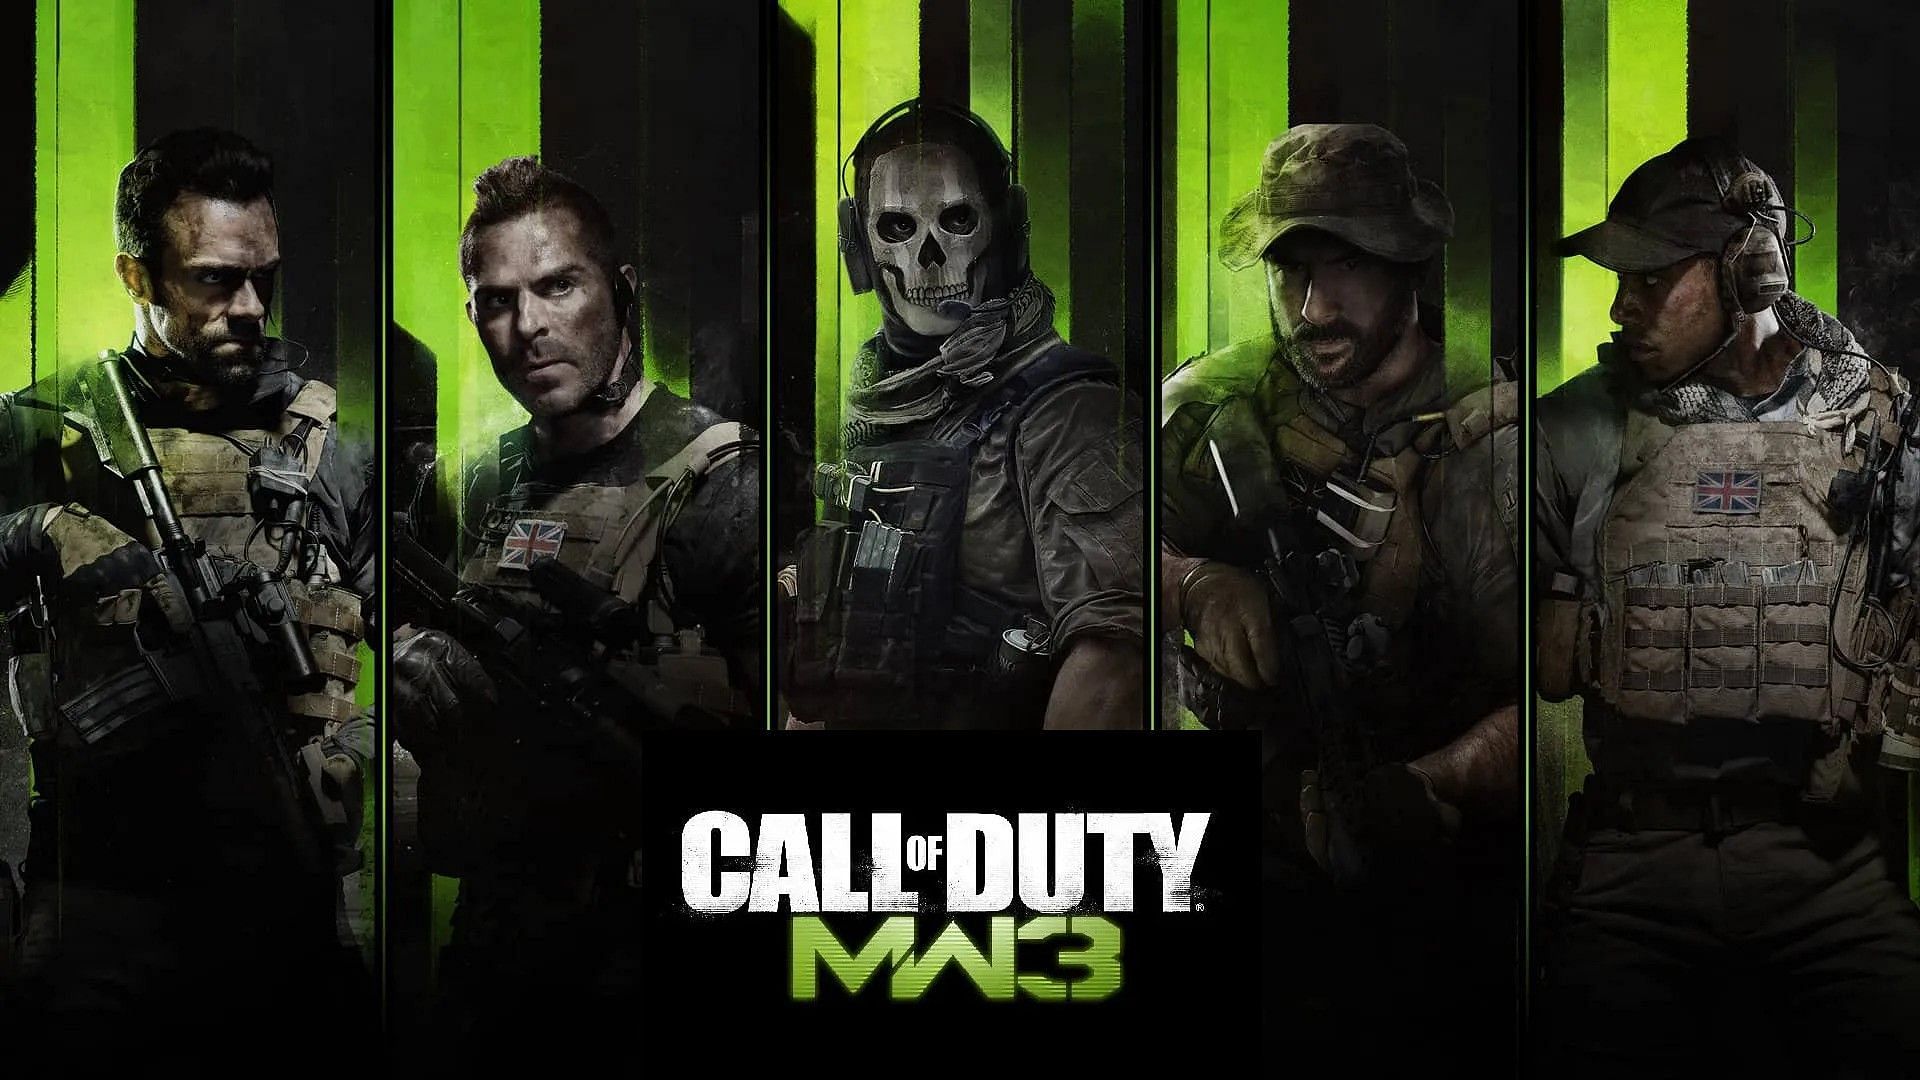 The logo for the next CoD title has been leaked (Image via Activision)